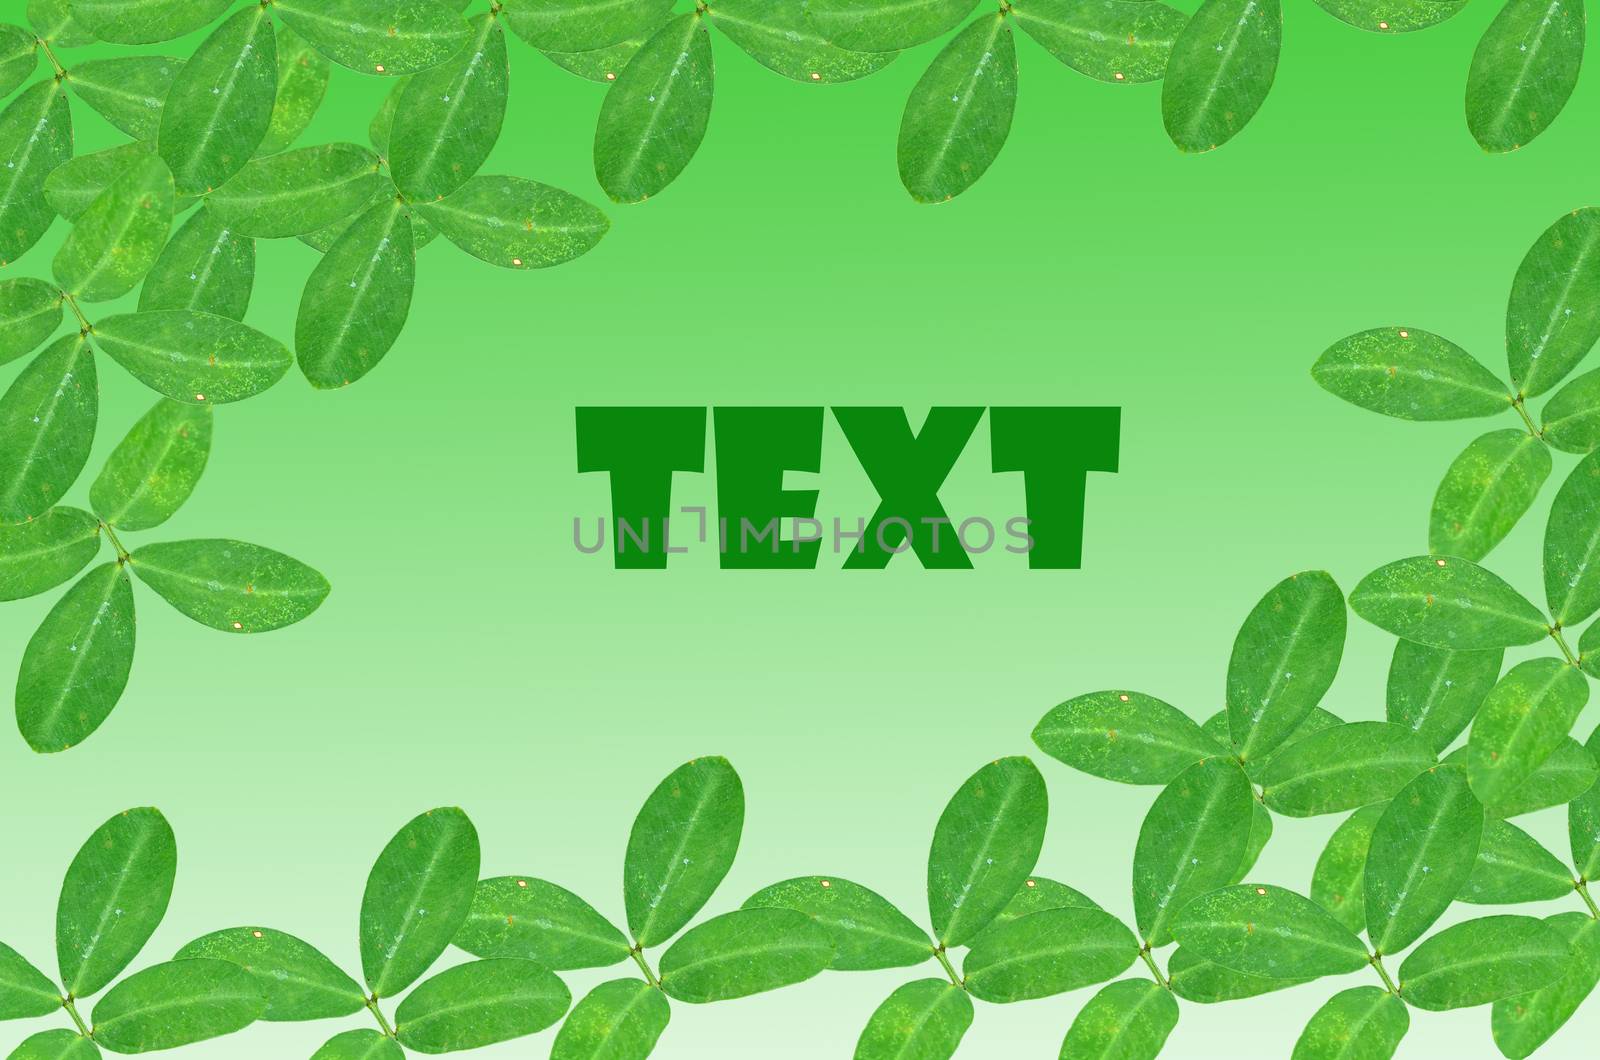 green leaves on white background with text